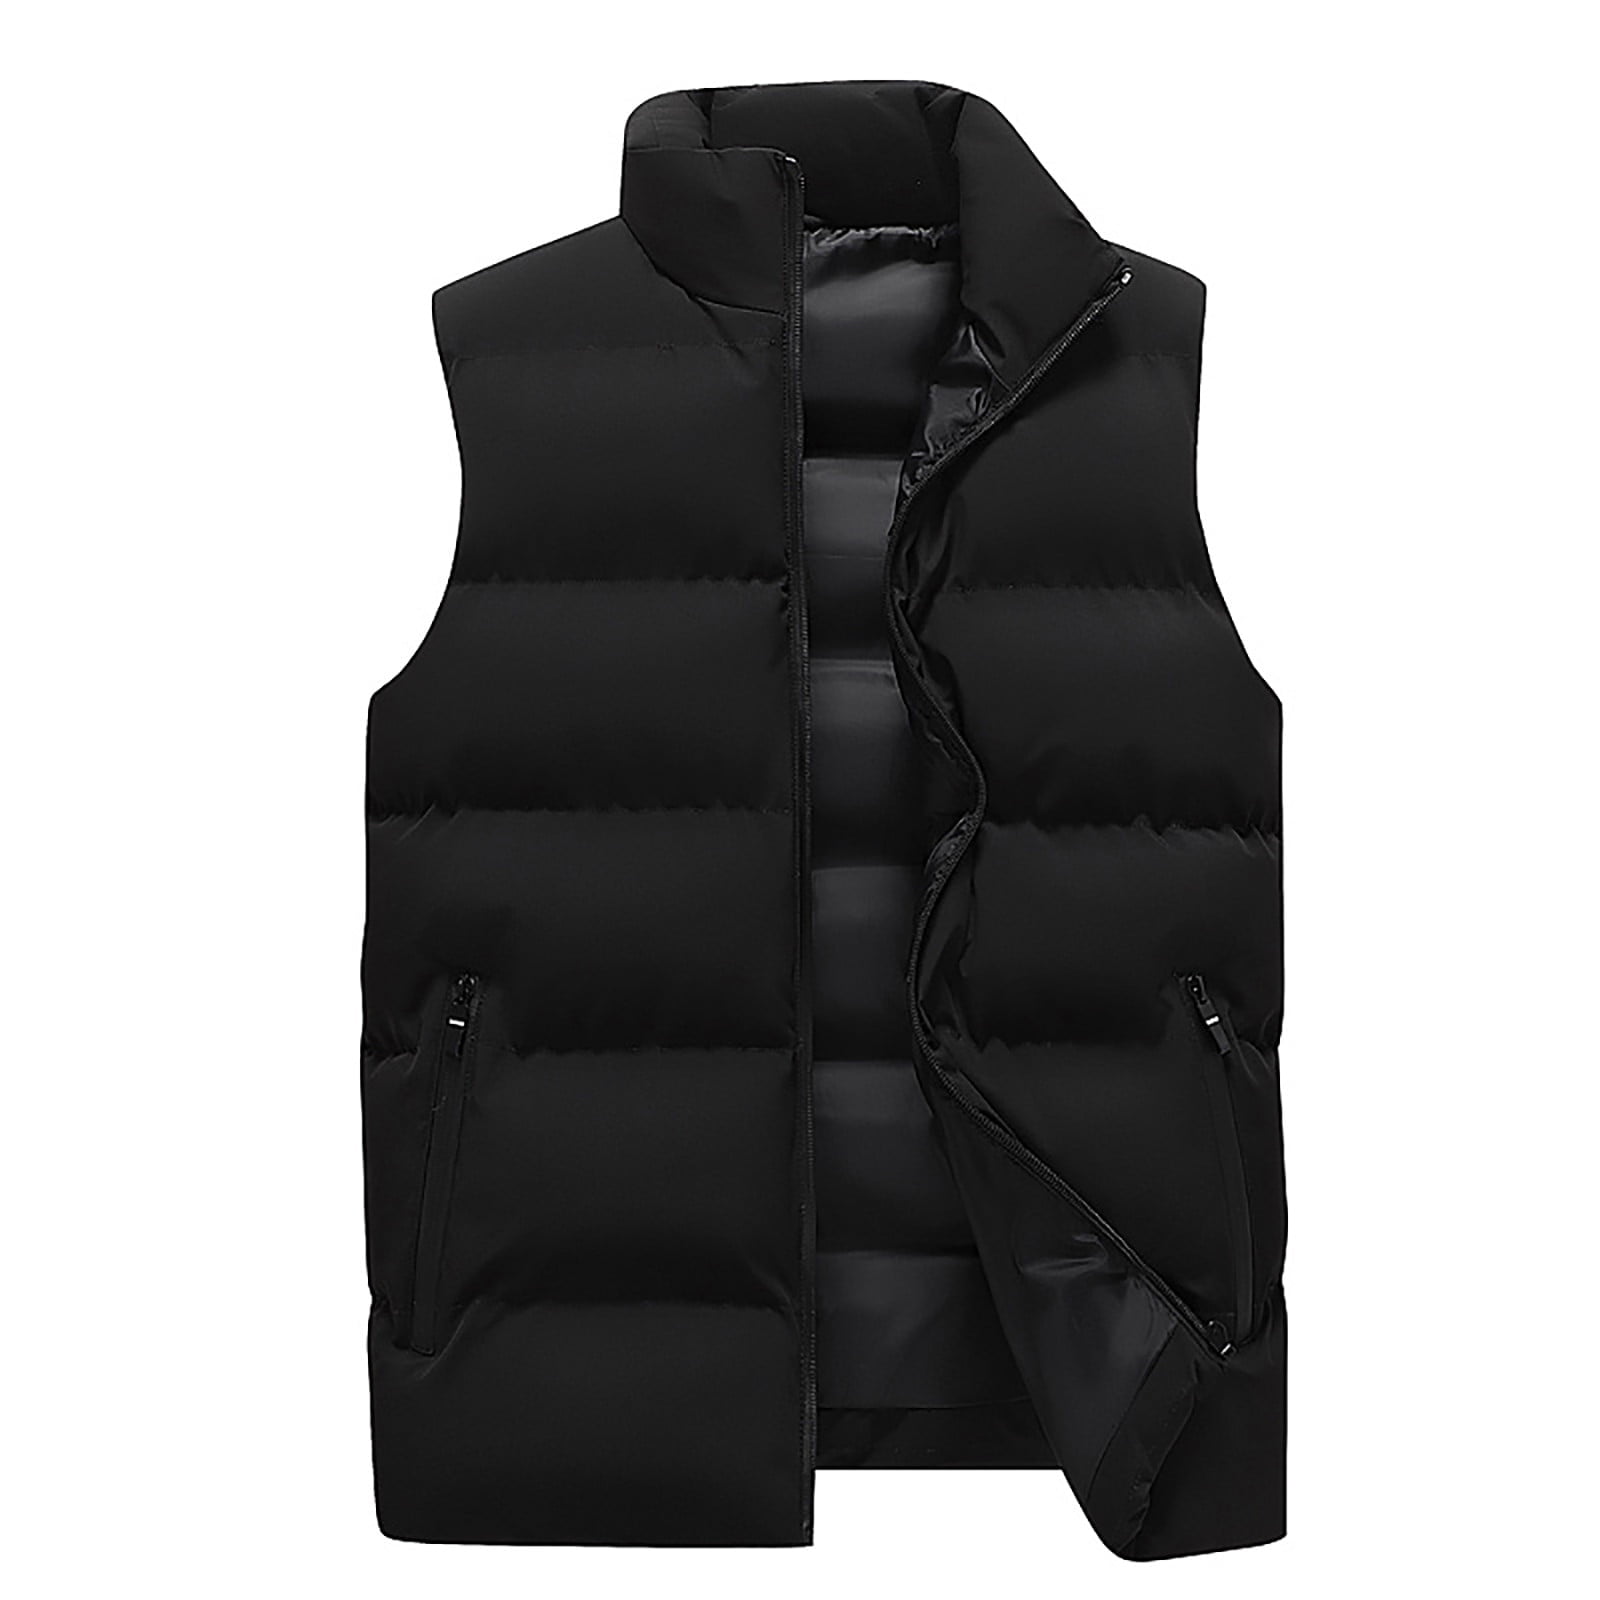 Camel Crown Puffer Vest Men Quilted Winter Padded Sleeveless Jackets Gilet for Casual Work Travel Outdoor